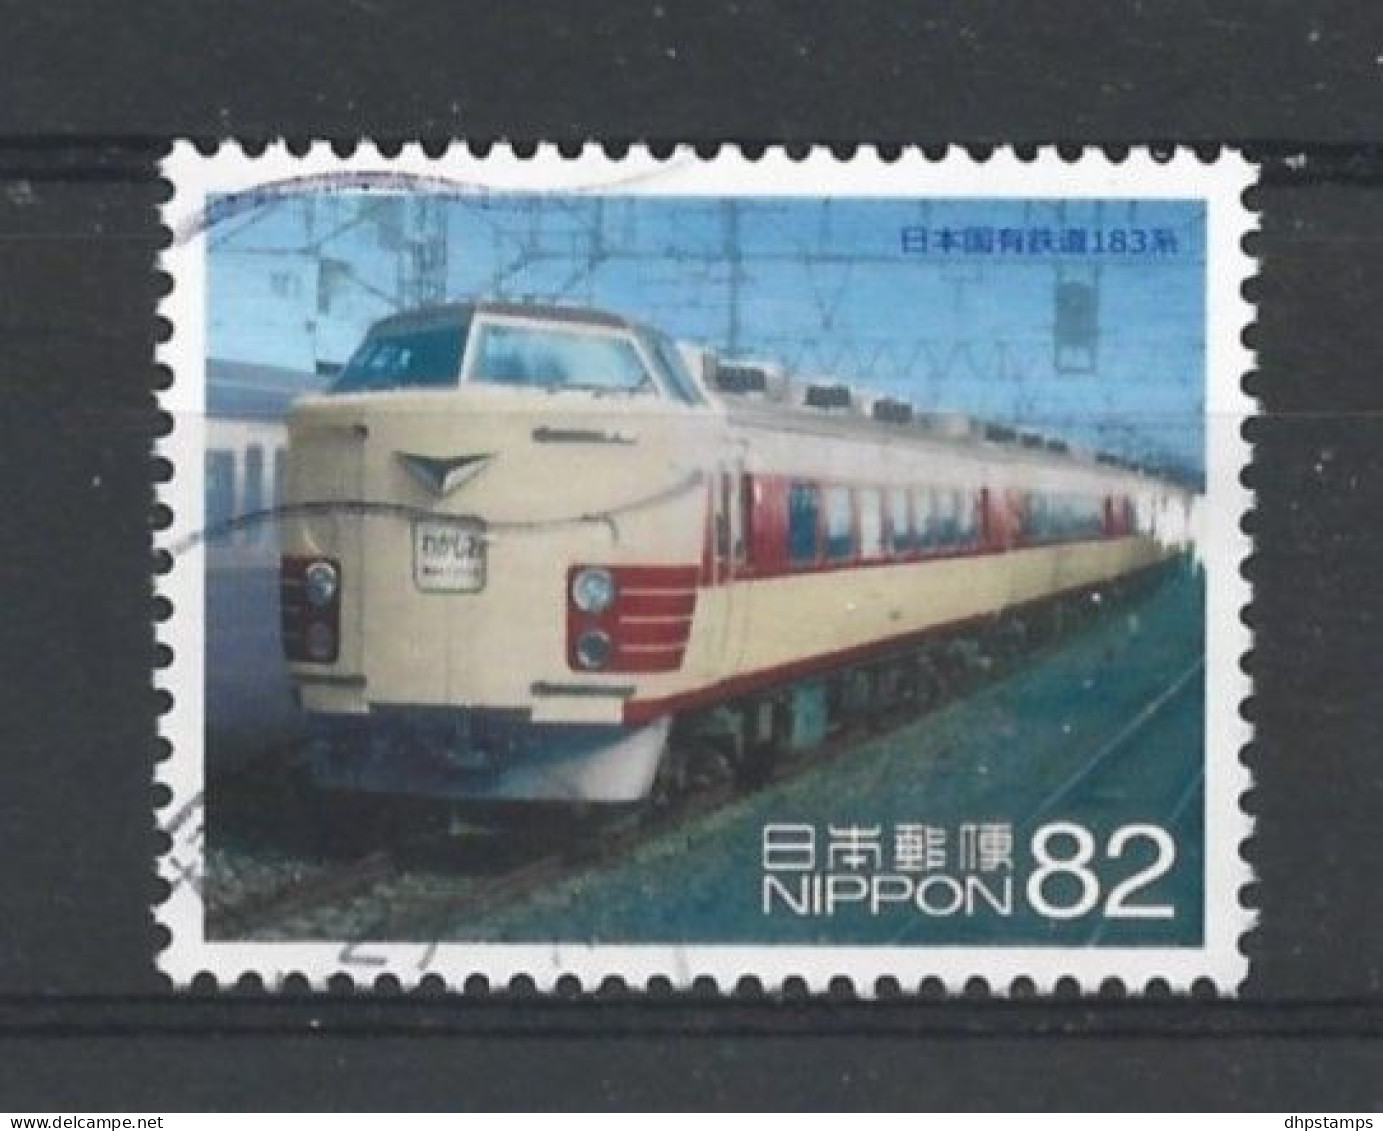 Japan 2015 Train Y.T. 7253 (0) - Used Stamps